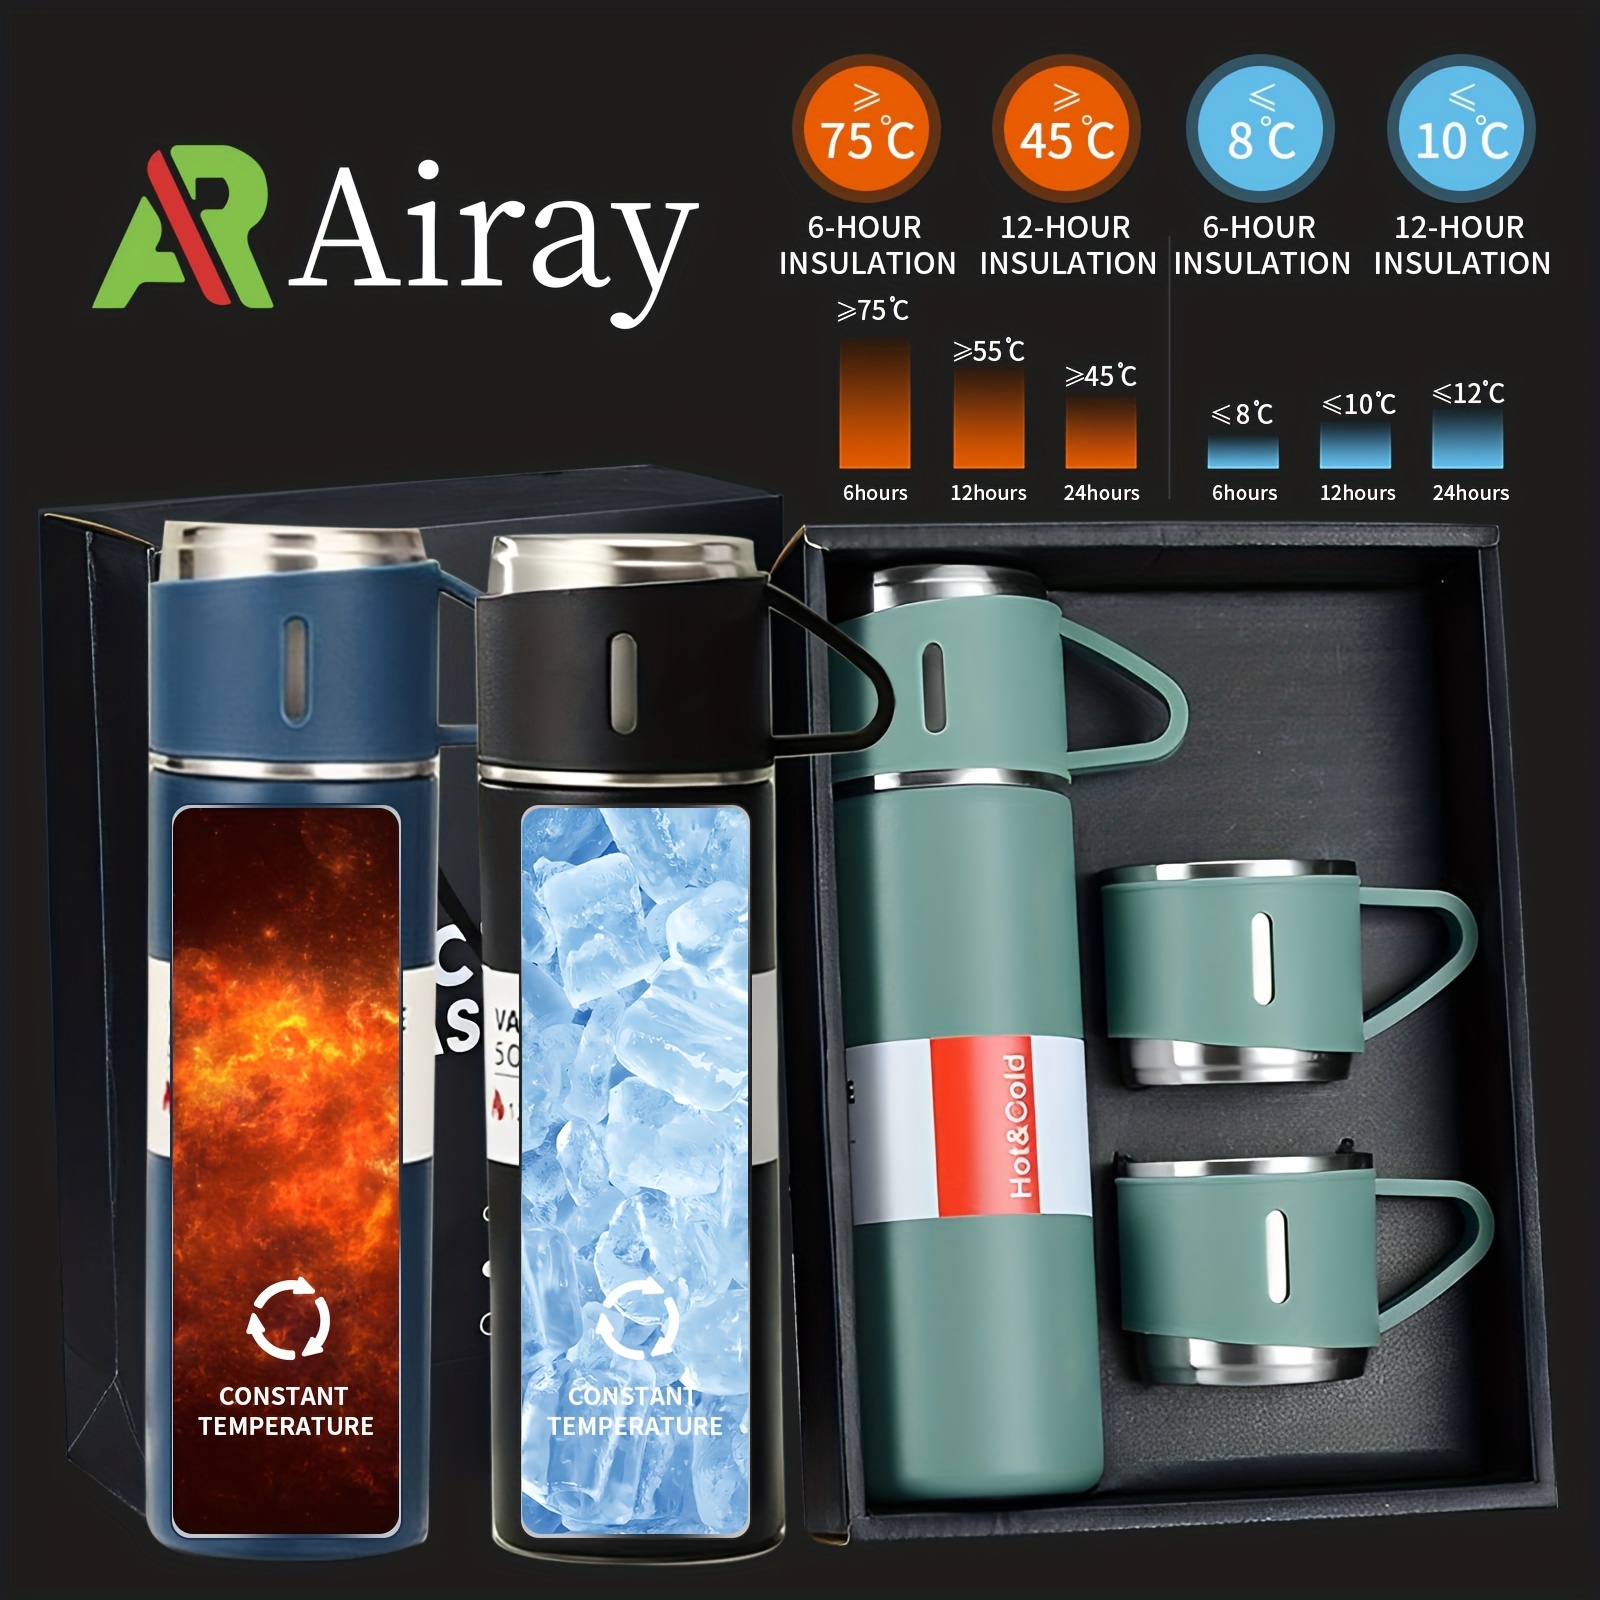 

Stainless Steel Thermal Mug Gift Set 500 Ml, Stainless Steel Tea Cup, Double Layer Insulation Water Bottle For Men Women Driving Camping Hiking